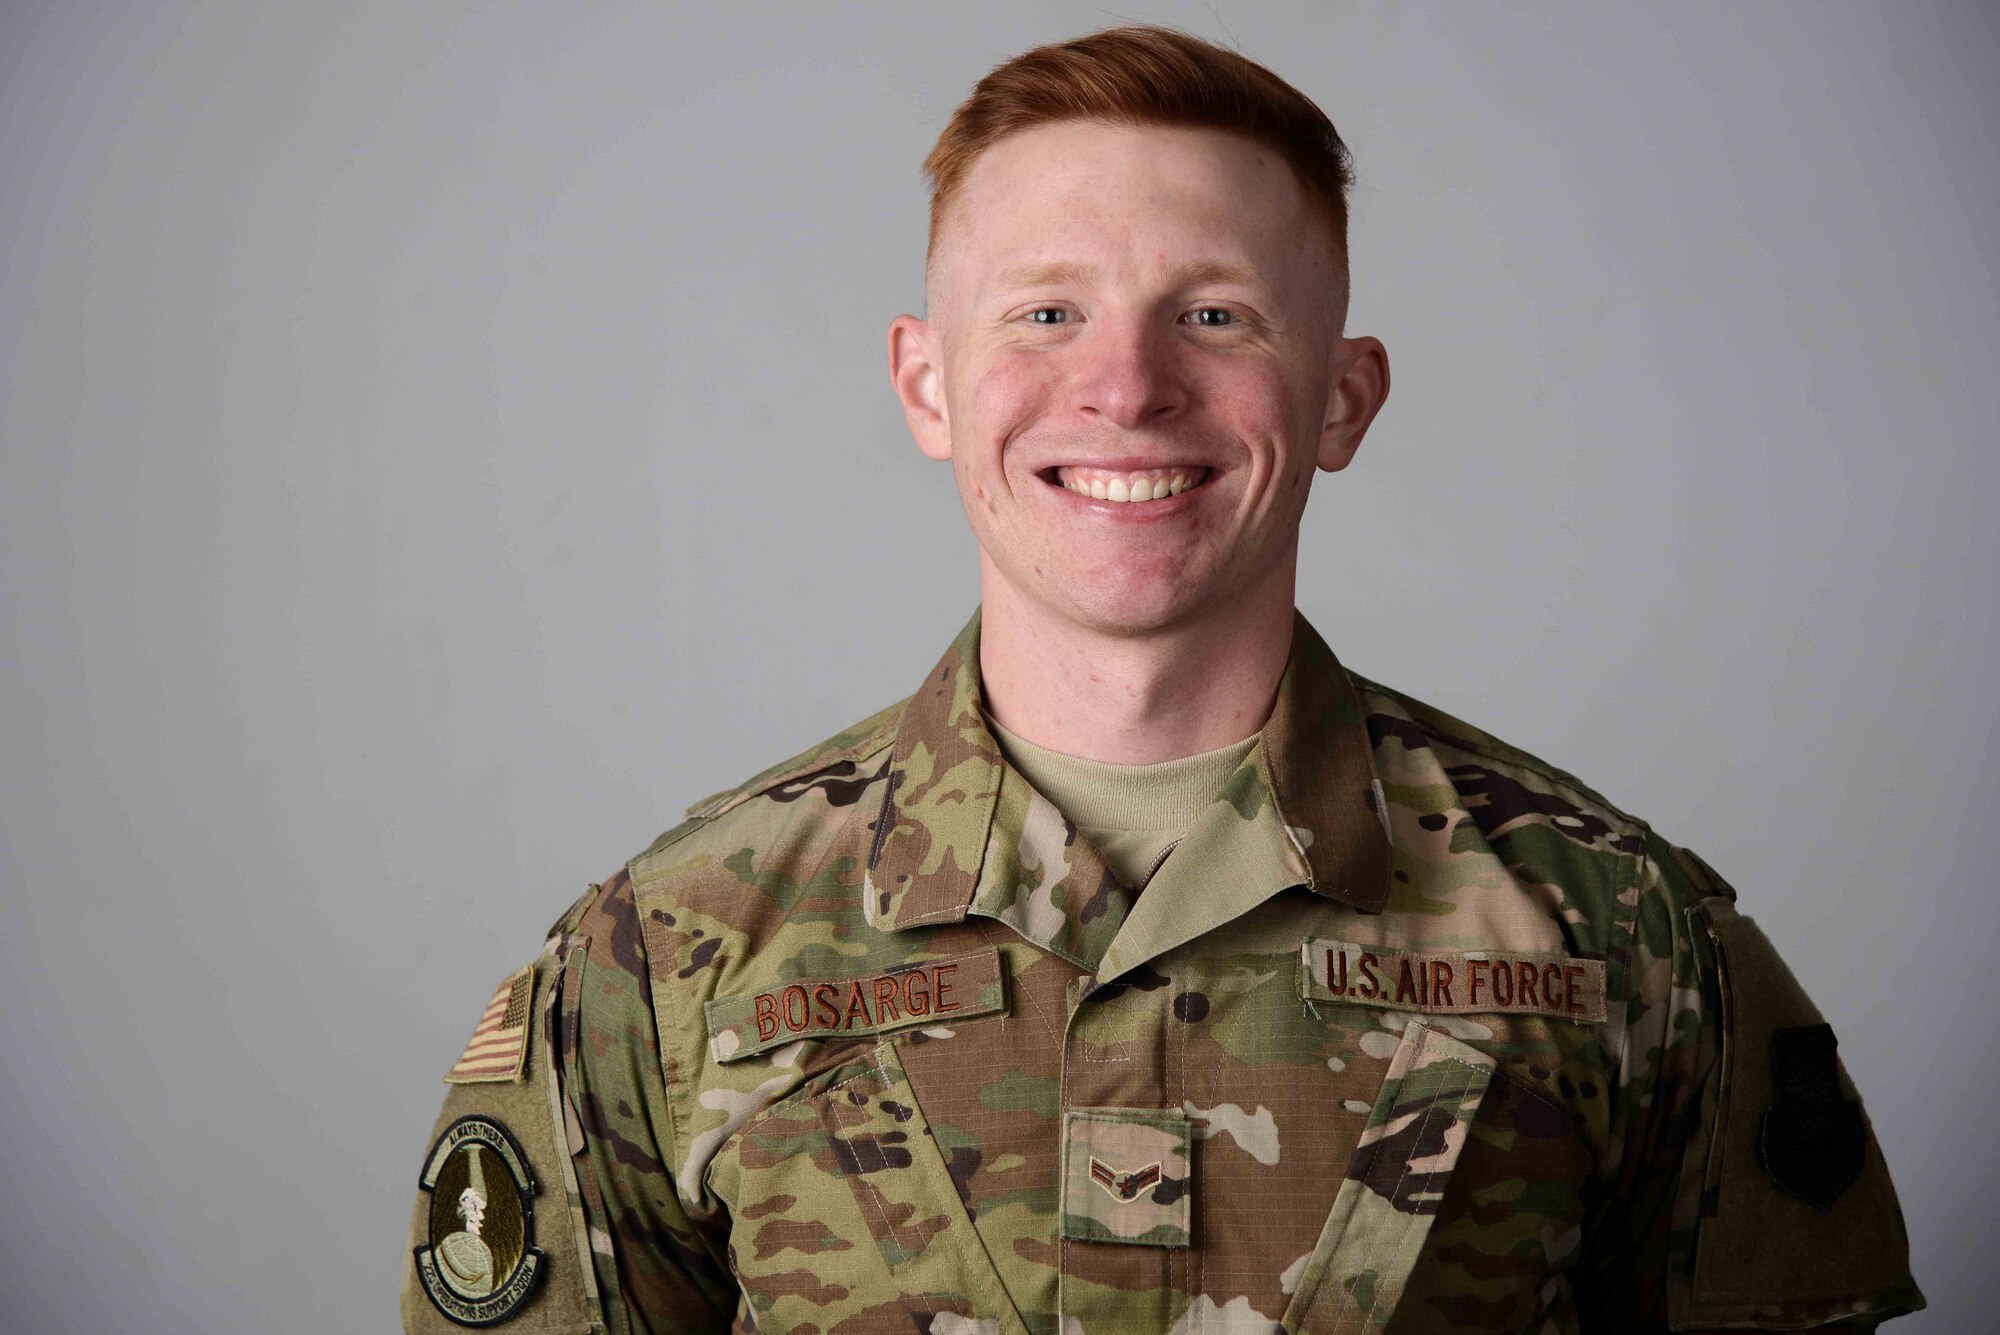 Airman 1st Class Douglas Bosarge, 22nd Operations Support Squadron airfield management shift lead, poses for a photo Nov. 13, 2019, at McConnell Air Force Base, Kan. Bosarge joined the Air Force in Feb. 2018 and was later stationed at McConnell as his first base. (U.S. Air Force photo by Airman 1st Class Alexi Bosarge)